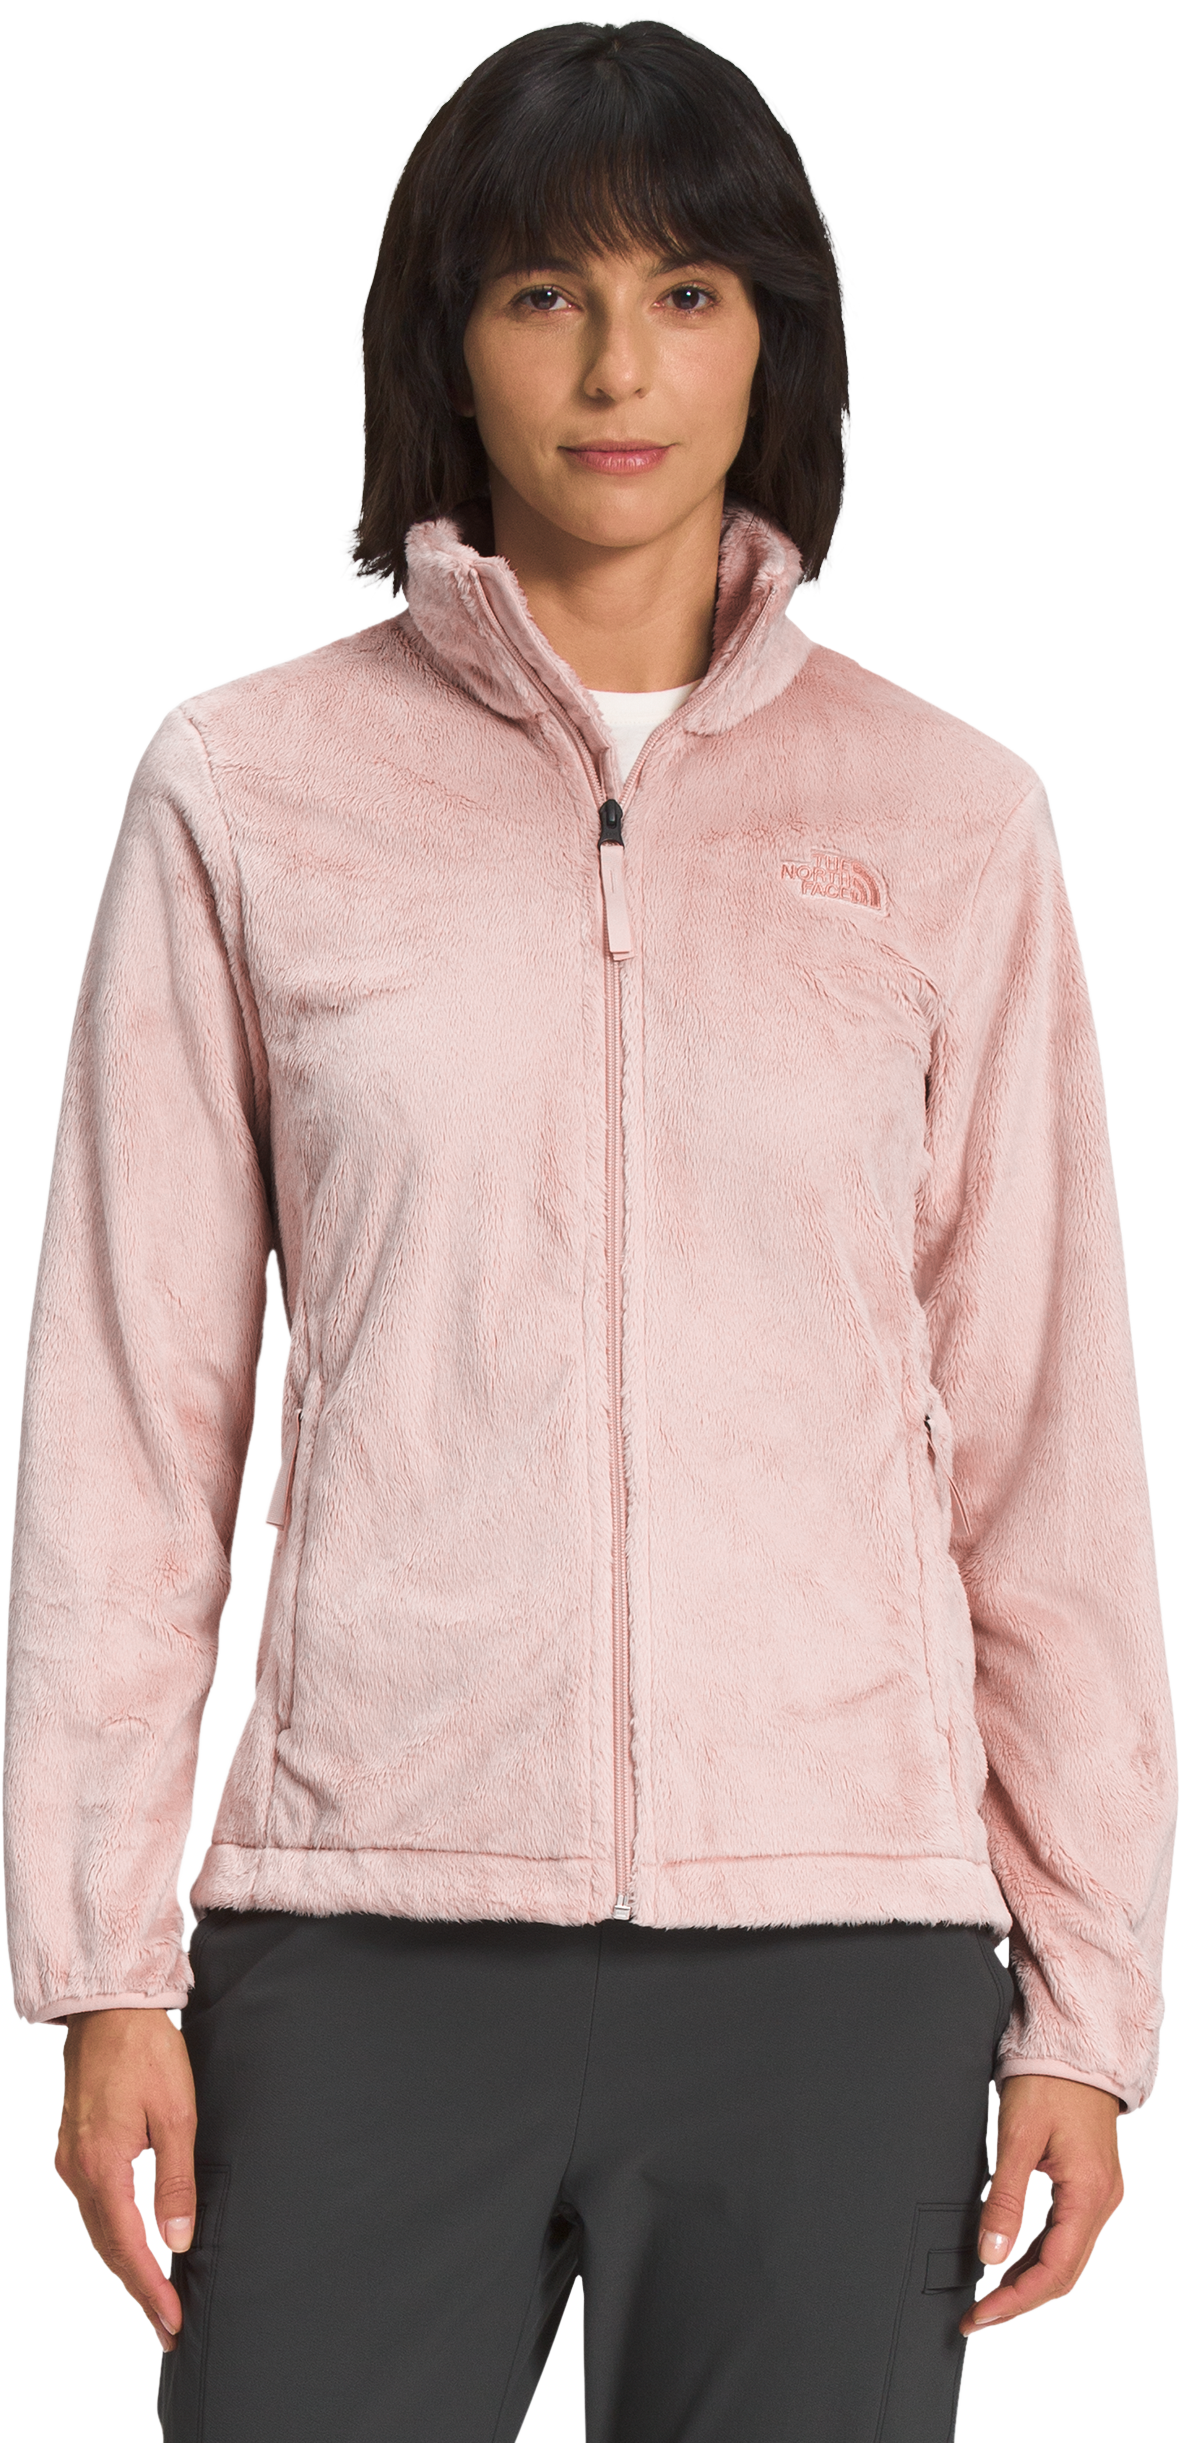 The North Face Osito Jacket for Ladies - Pink Moss - XXL